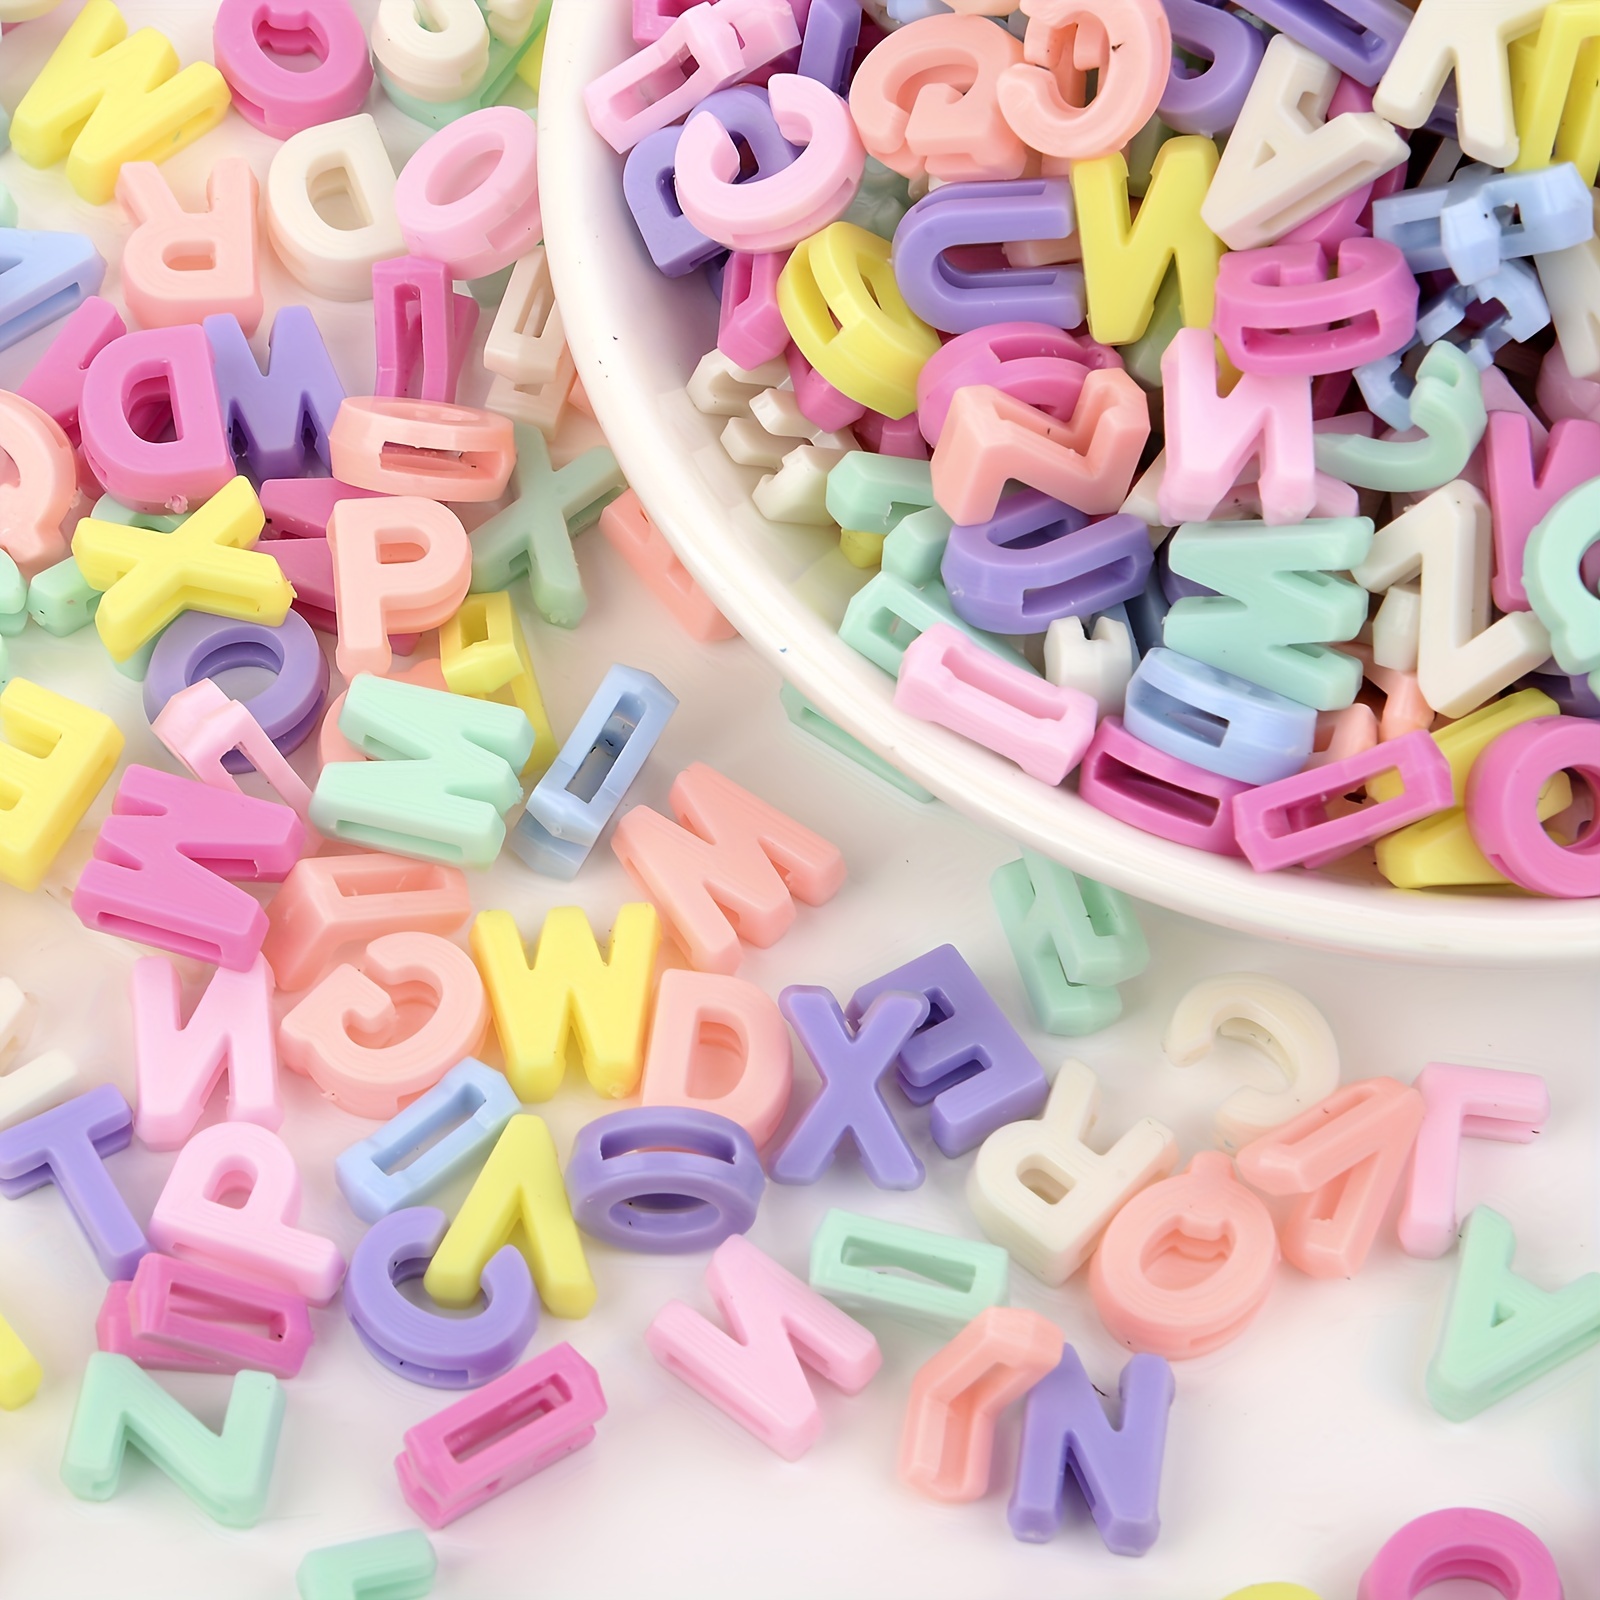 100pcs Acrylic Letter Beads Alphabet Beads Letters Beads for Bracelet and  Jewelry Making